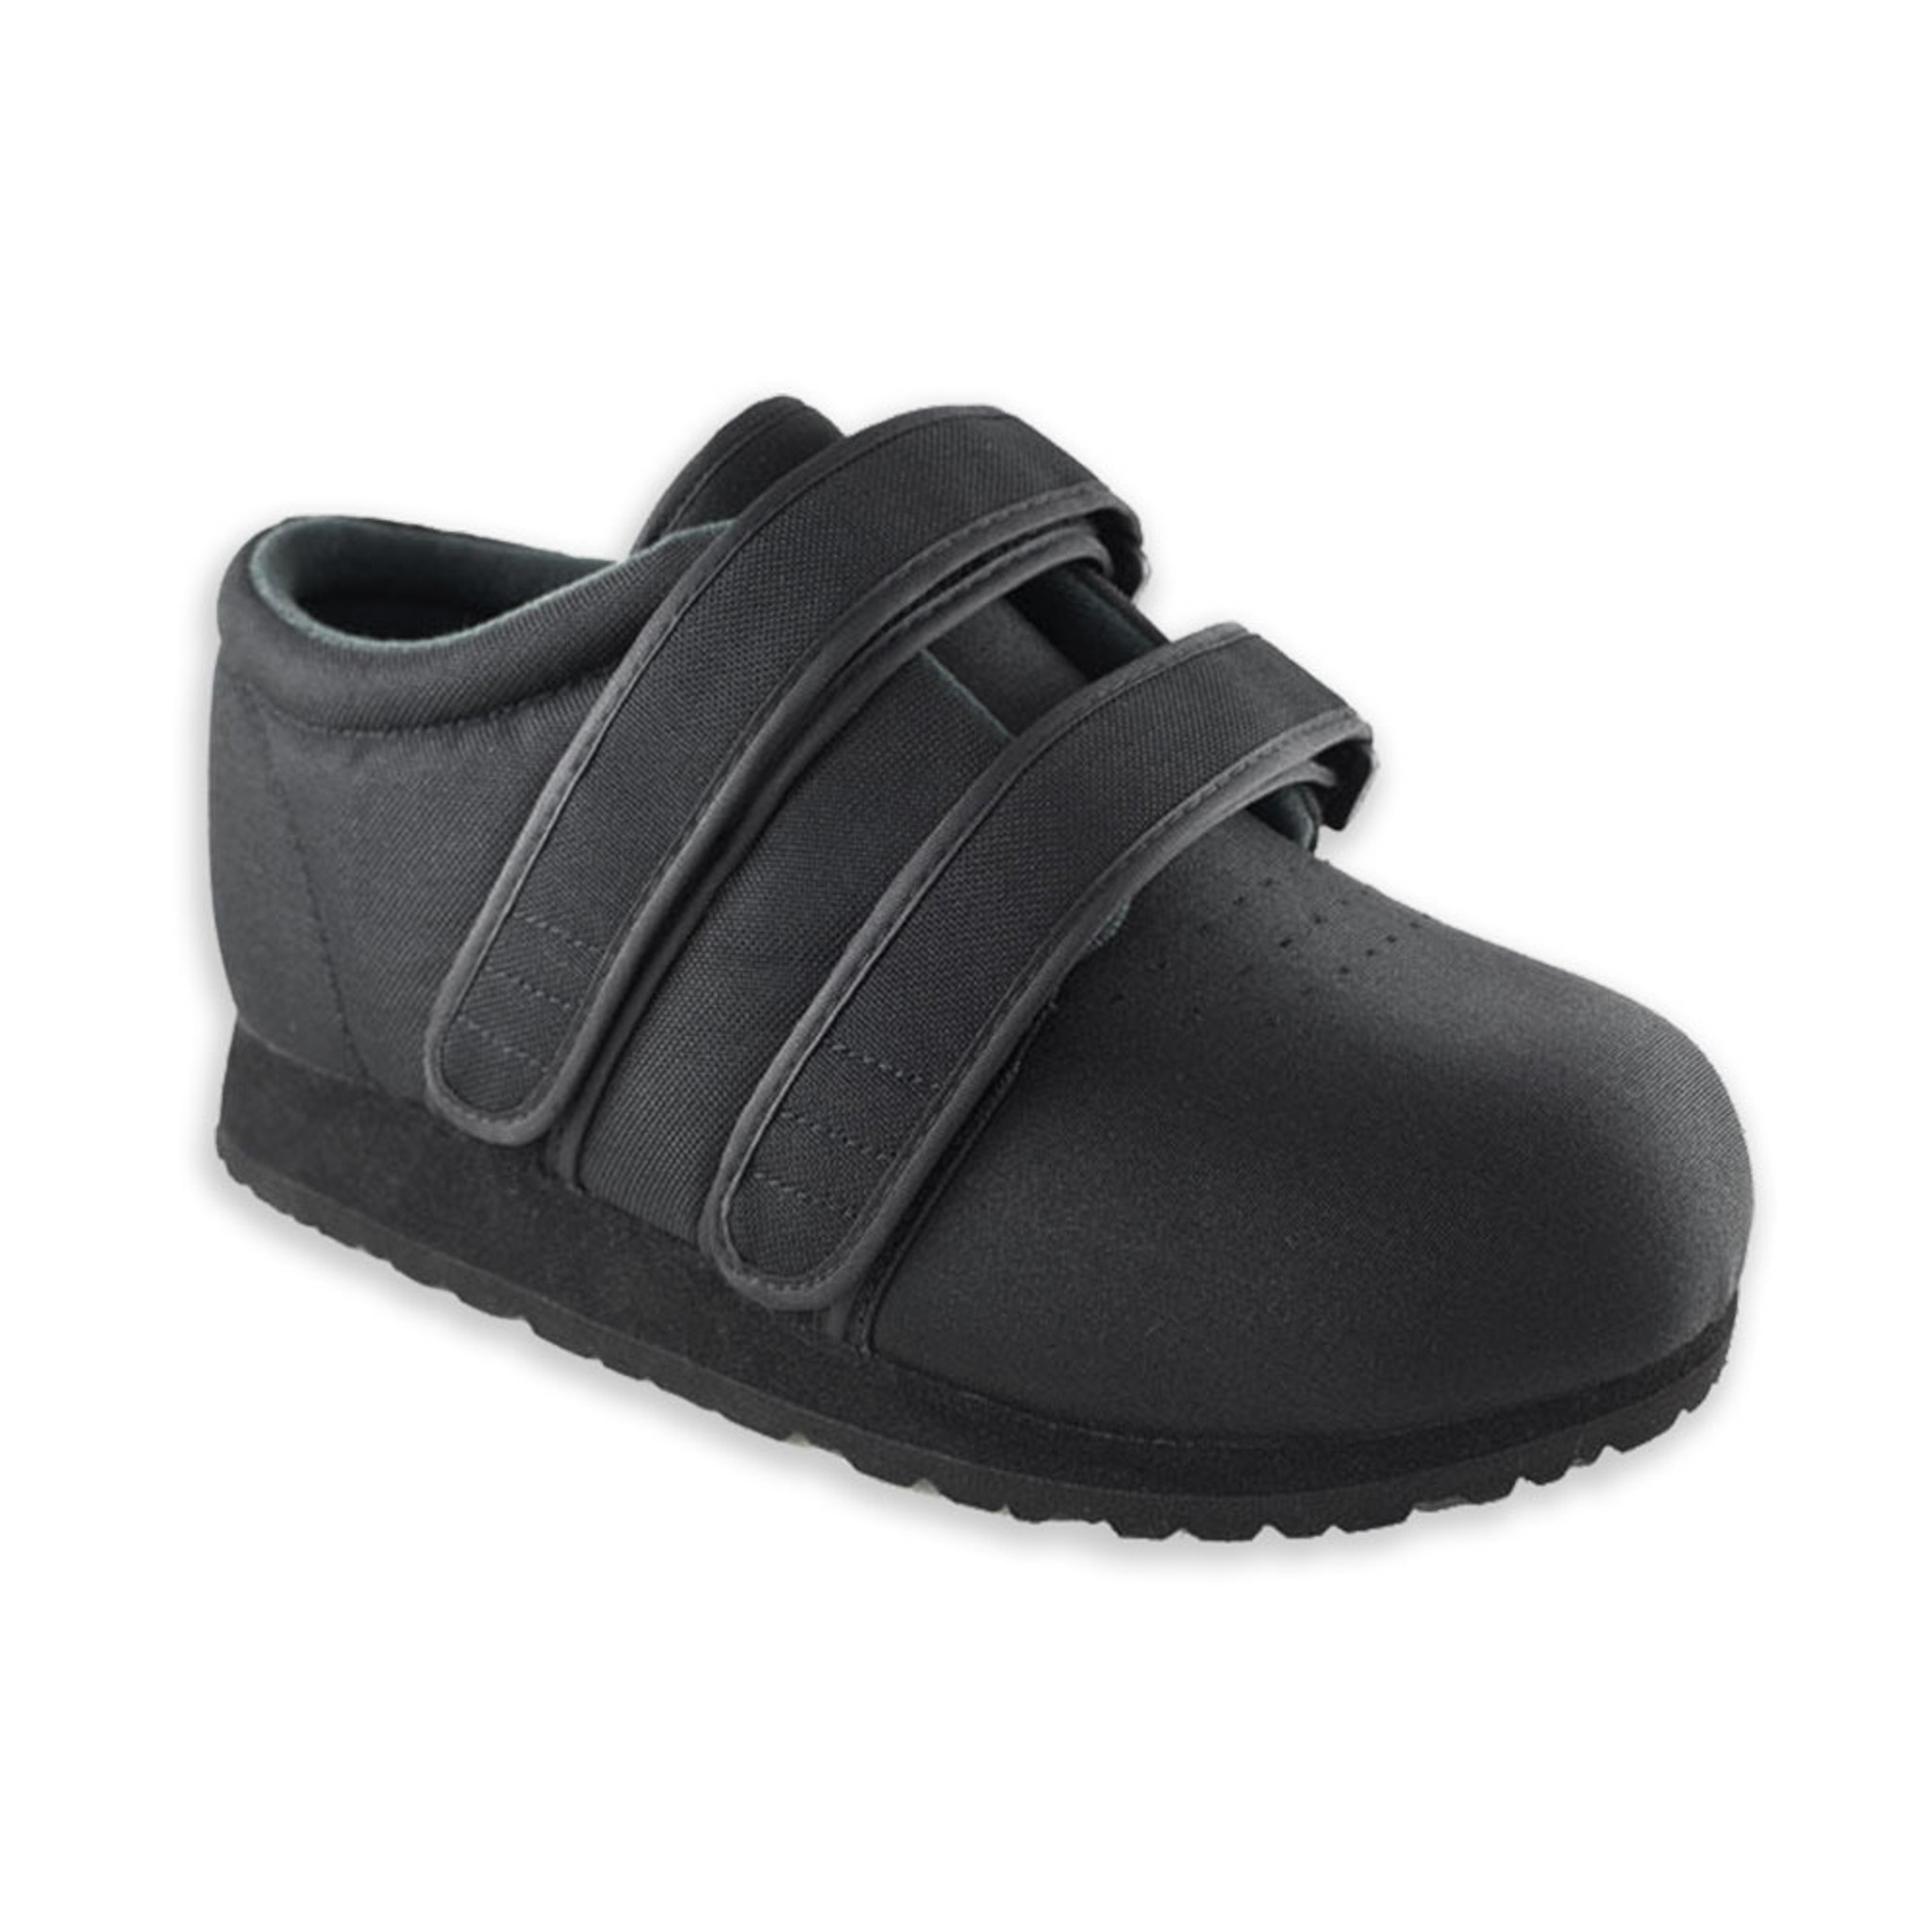 comfortable shoes for swollen feet